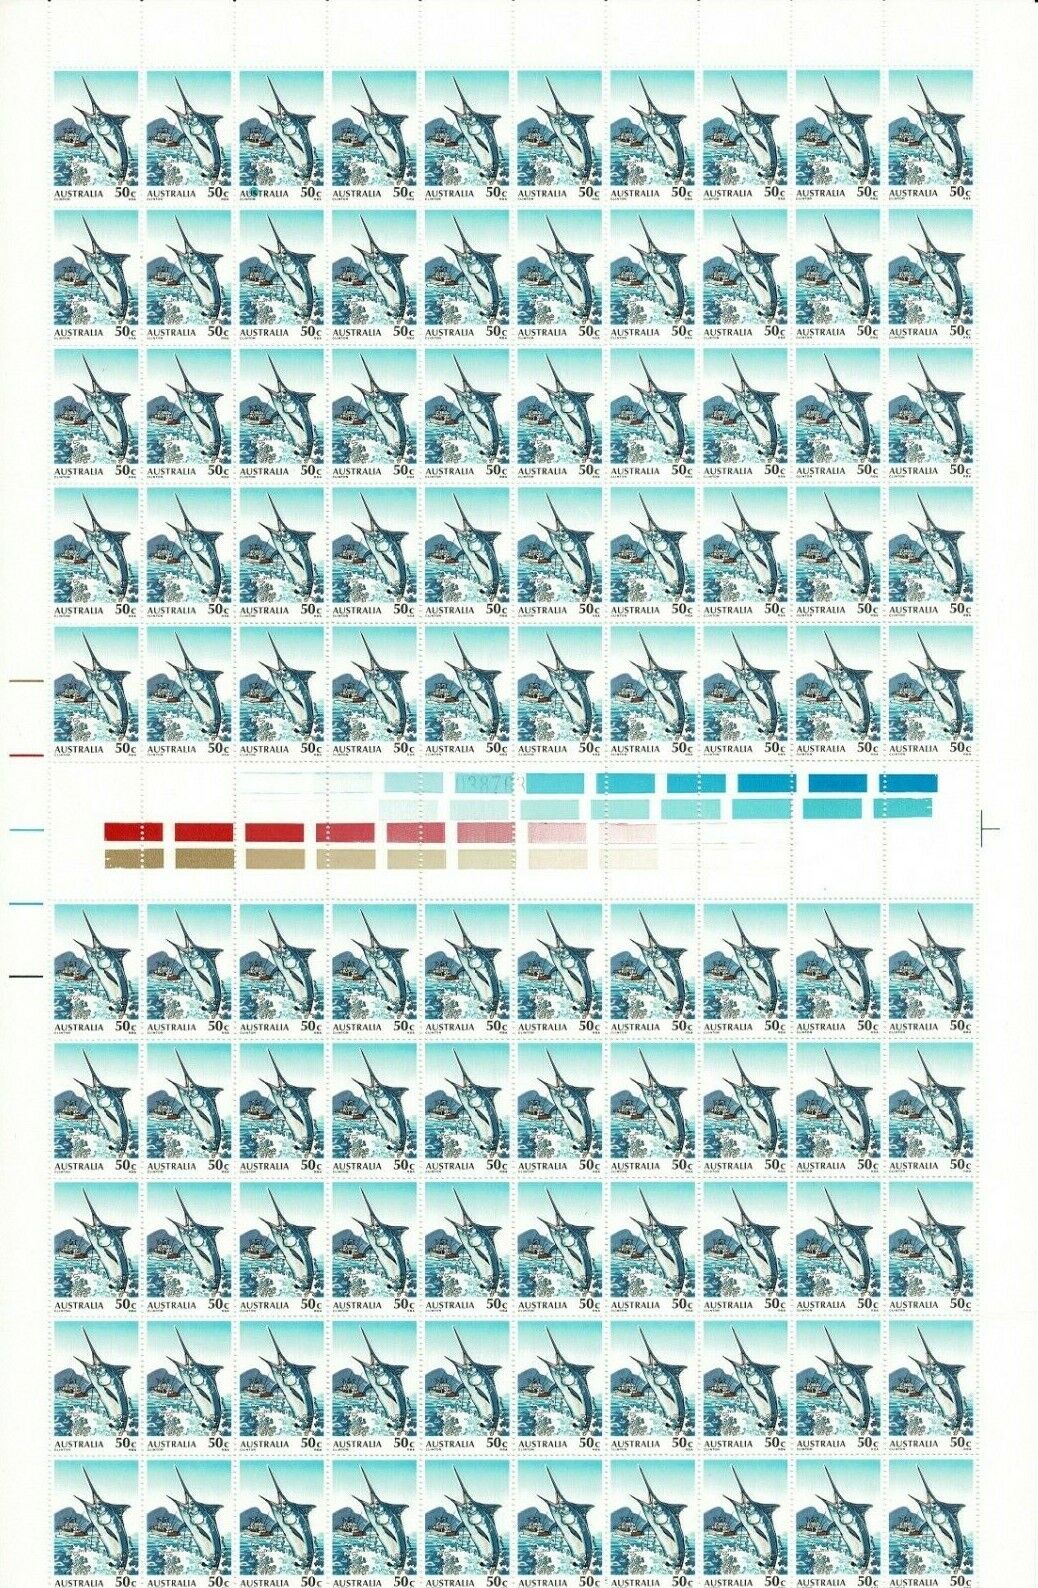 Stamps Max 81% OFF 1979 Australia 50c fishing in sheet 2021new shipping free 100 unfolded complete